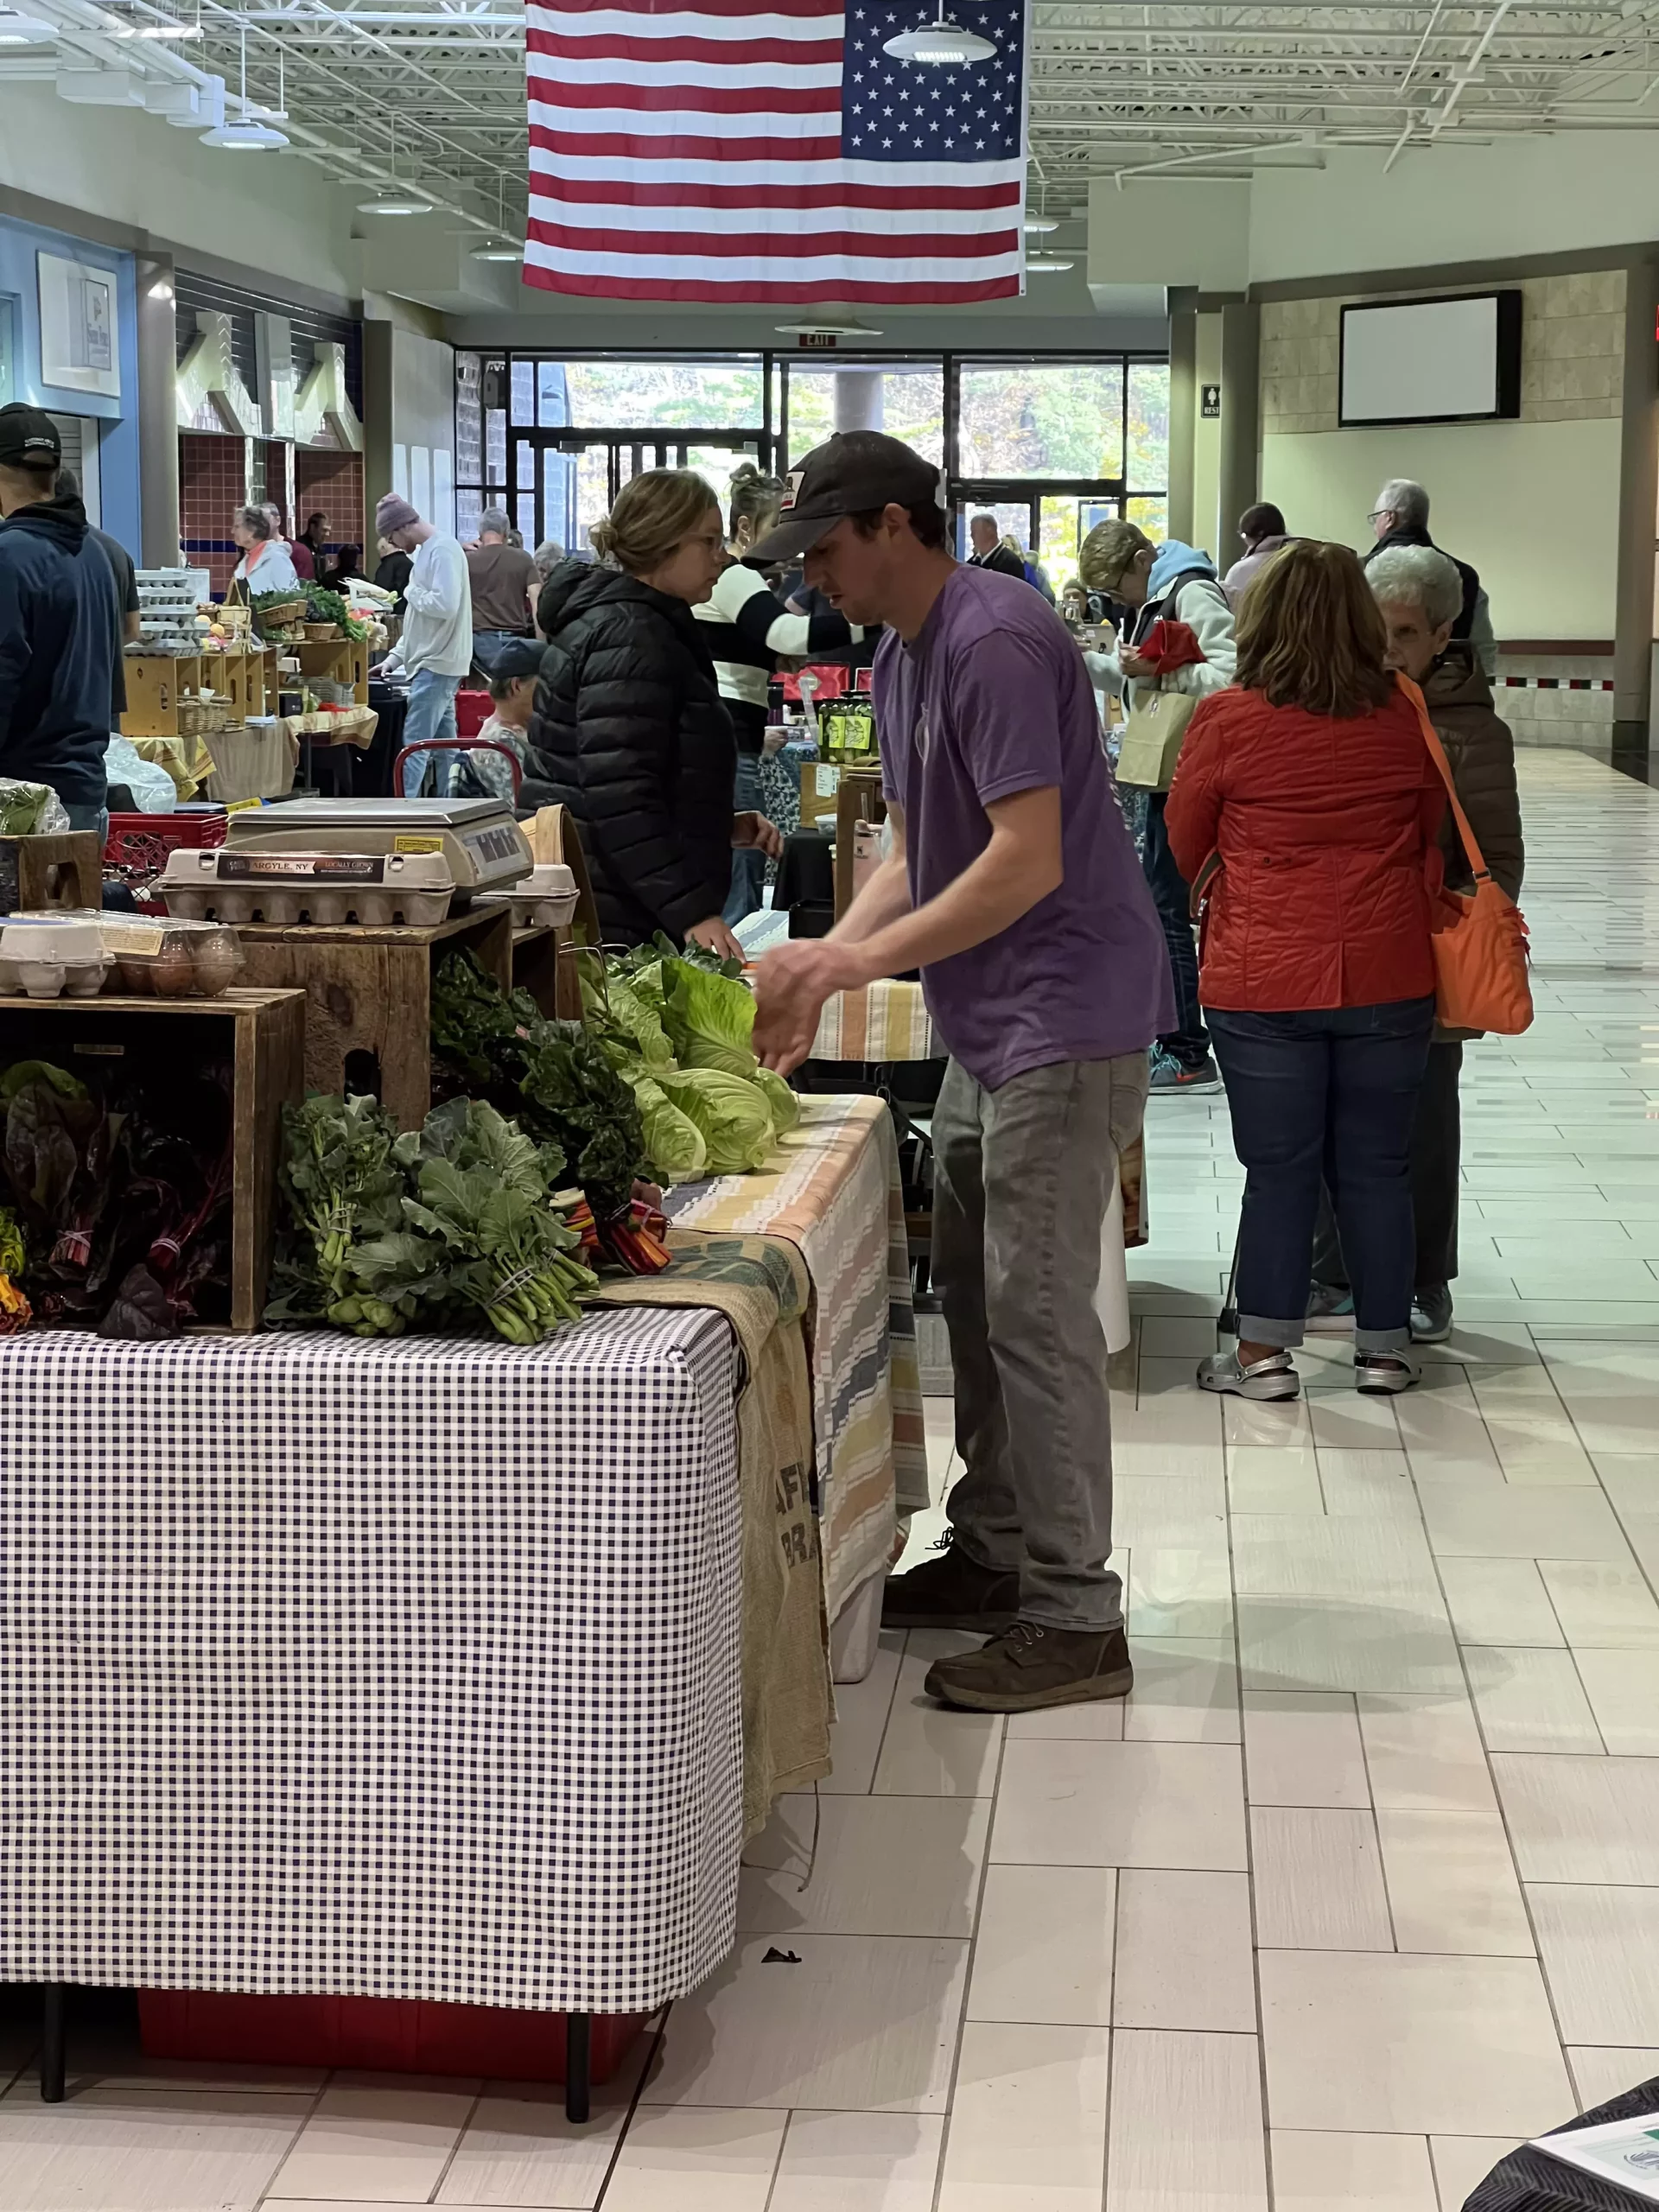 Shoppers browsing at an indoor farmers market.